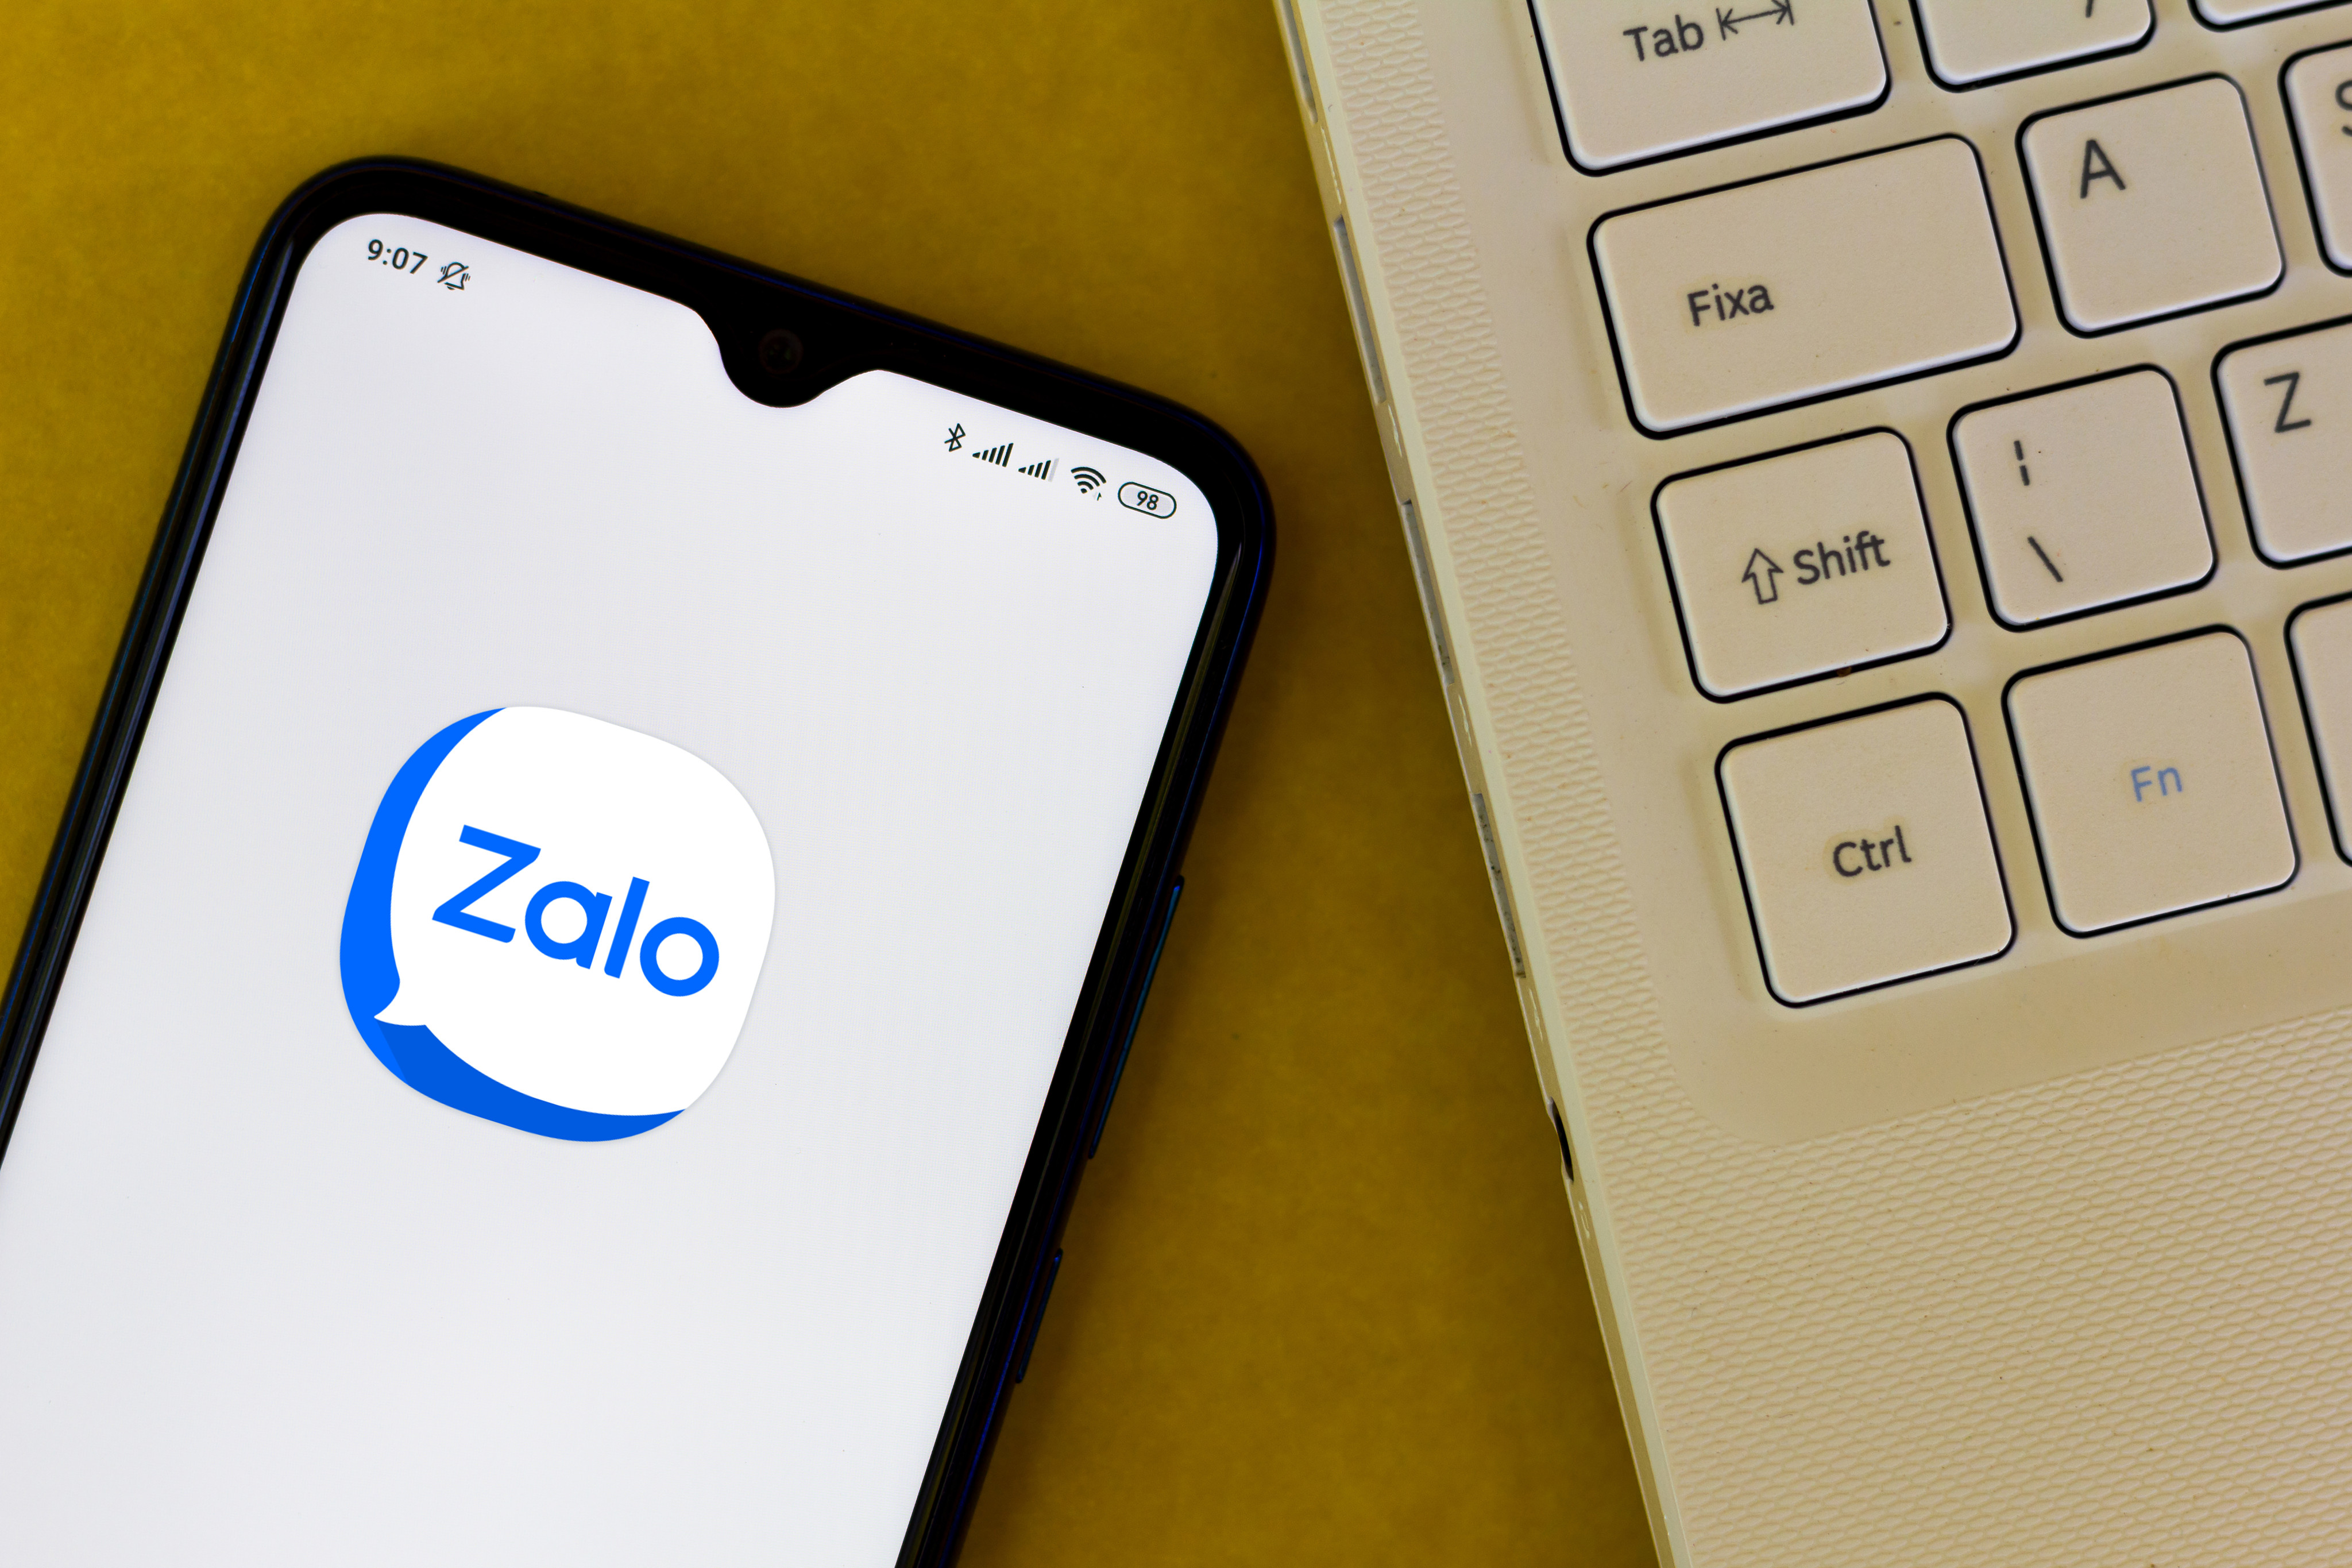 Zalo overtook Facebook Messenger in Vietnam in 2020 with features like mobile payments and gaming, similar to Tencent’s WeChat in China. Photo: Shutterstock